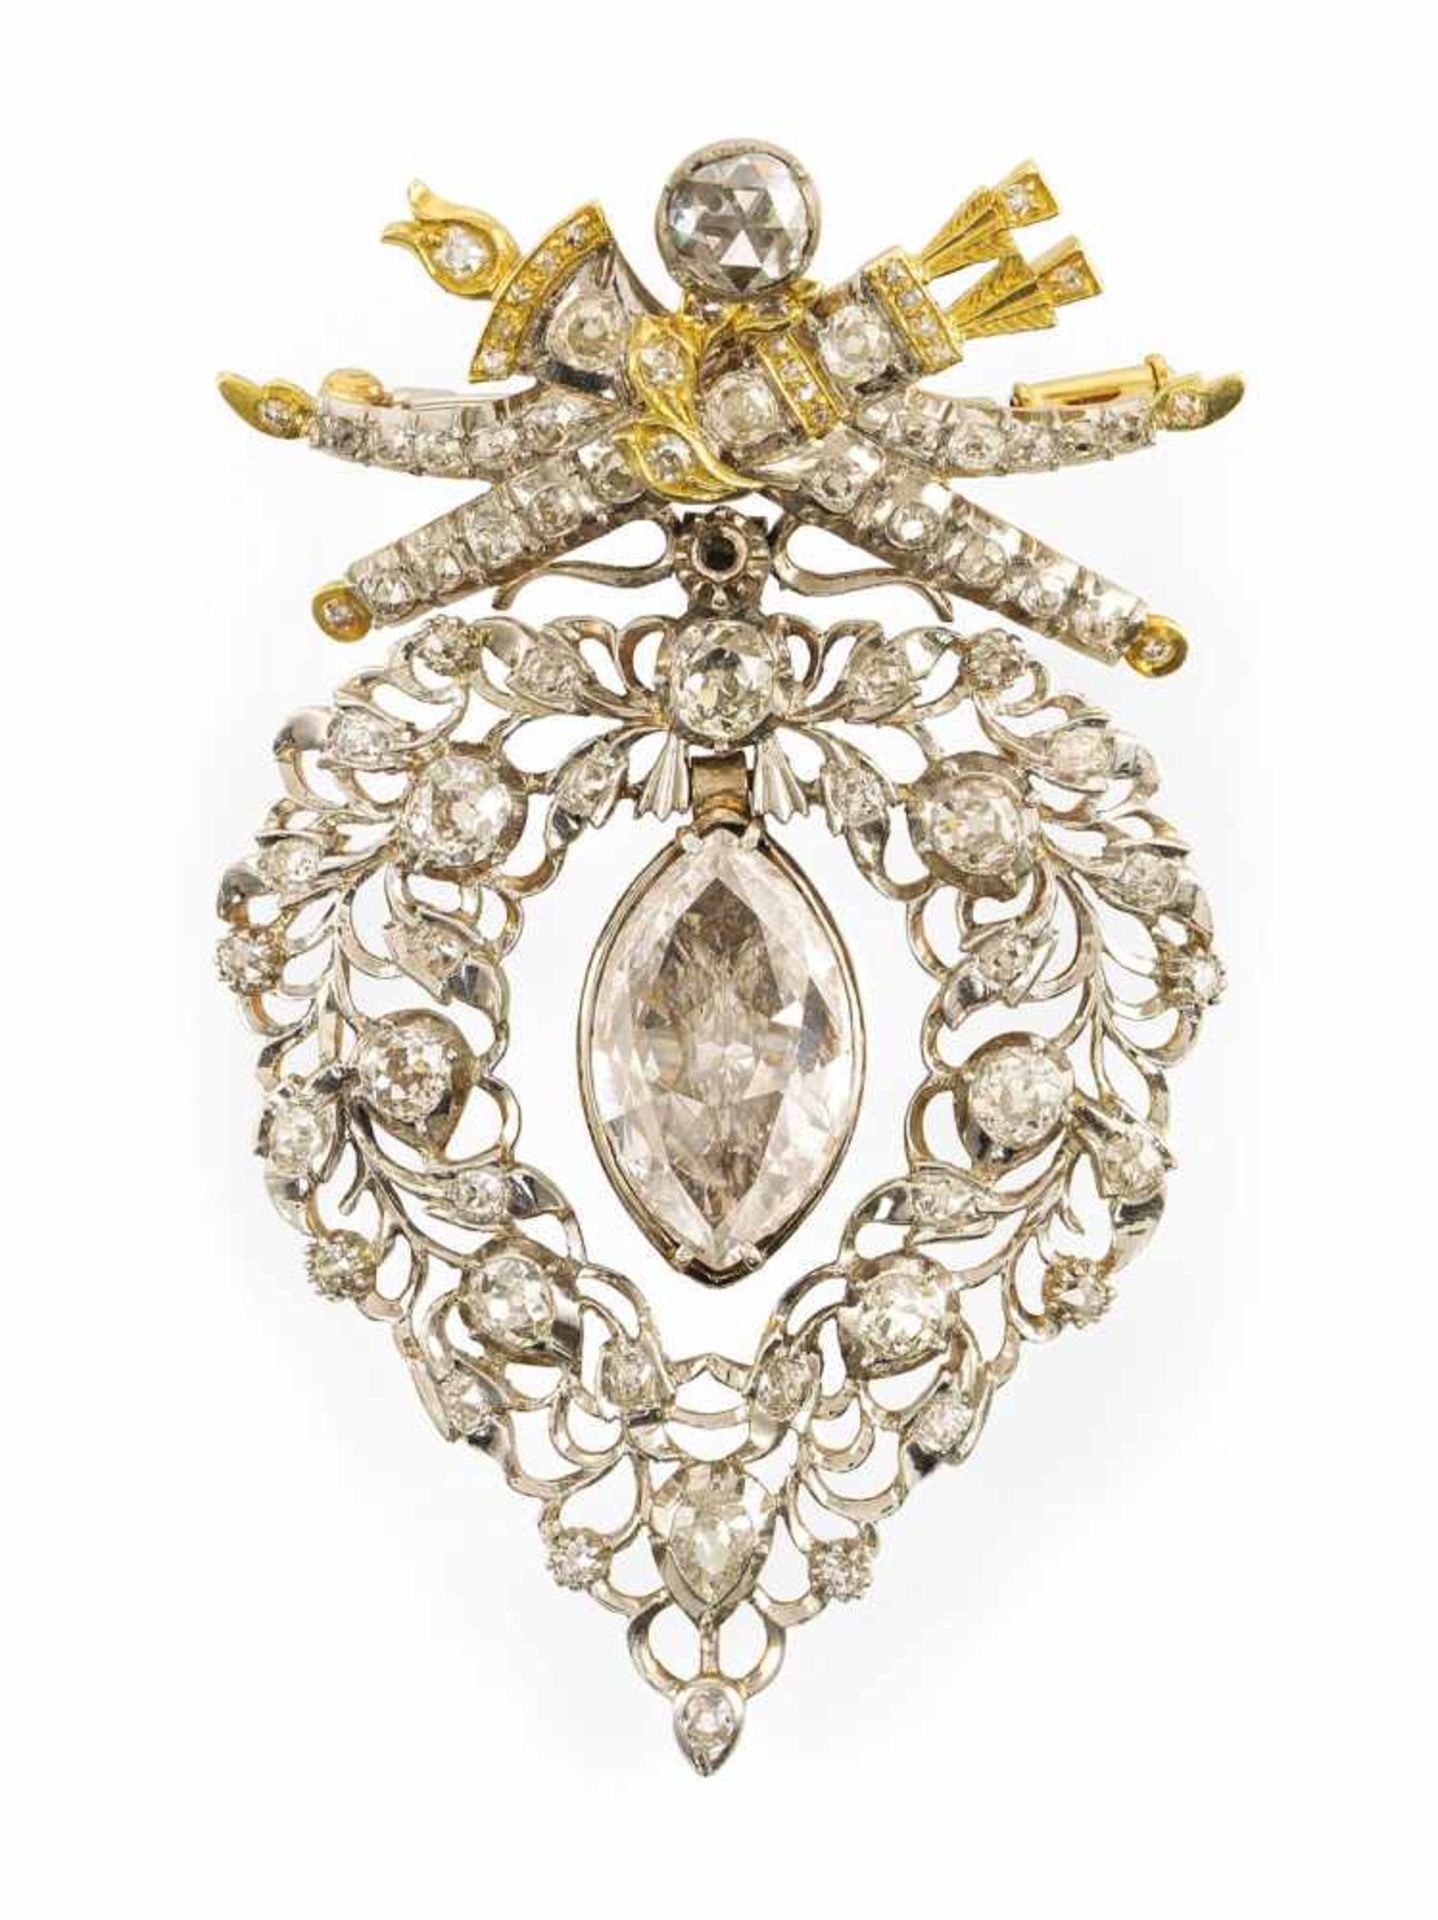 AN ELABORATE BAROQUE STYLE DIAMOND PENDANT/BROOCH. 585 yellow gold at the back and platinum on the